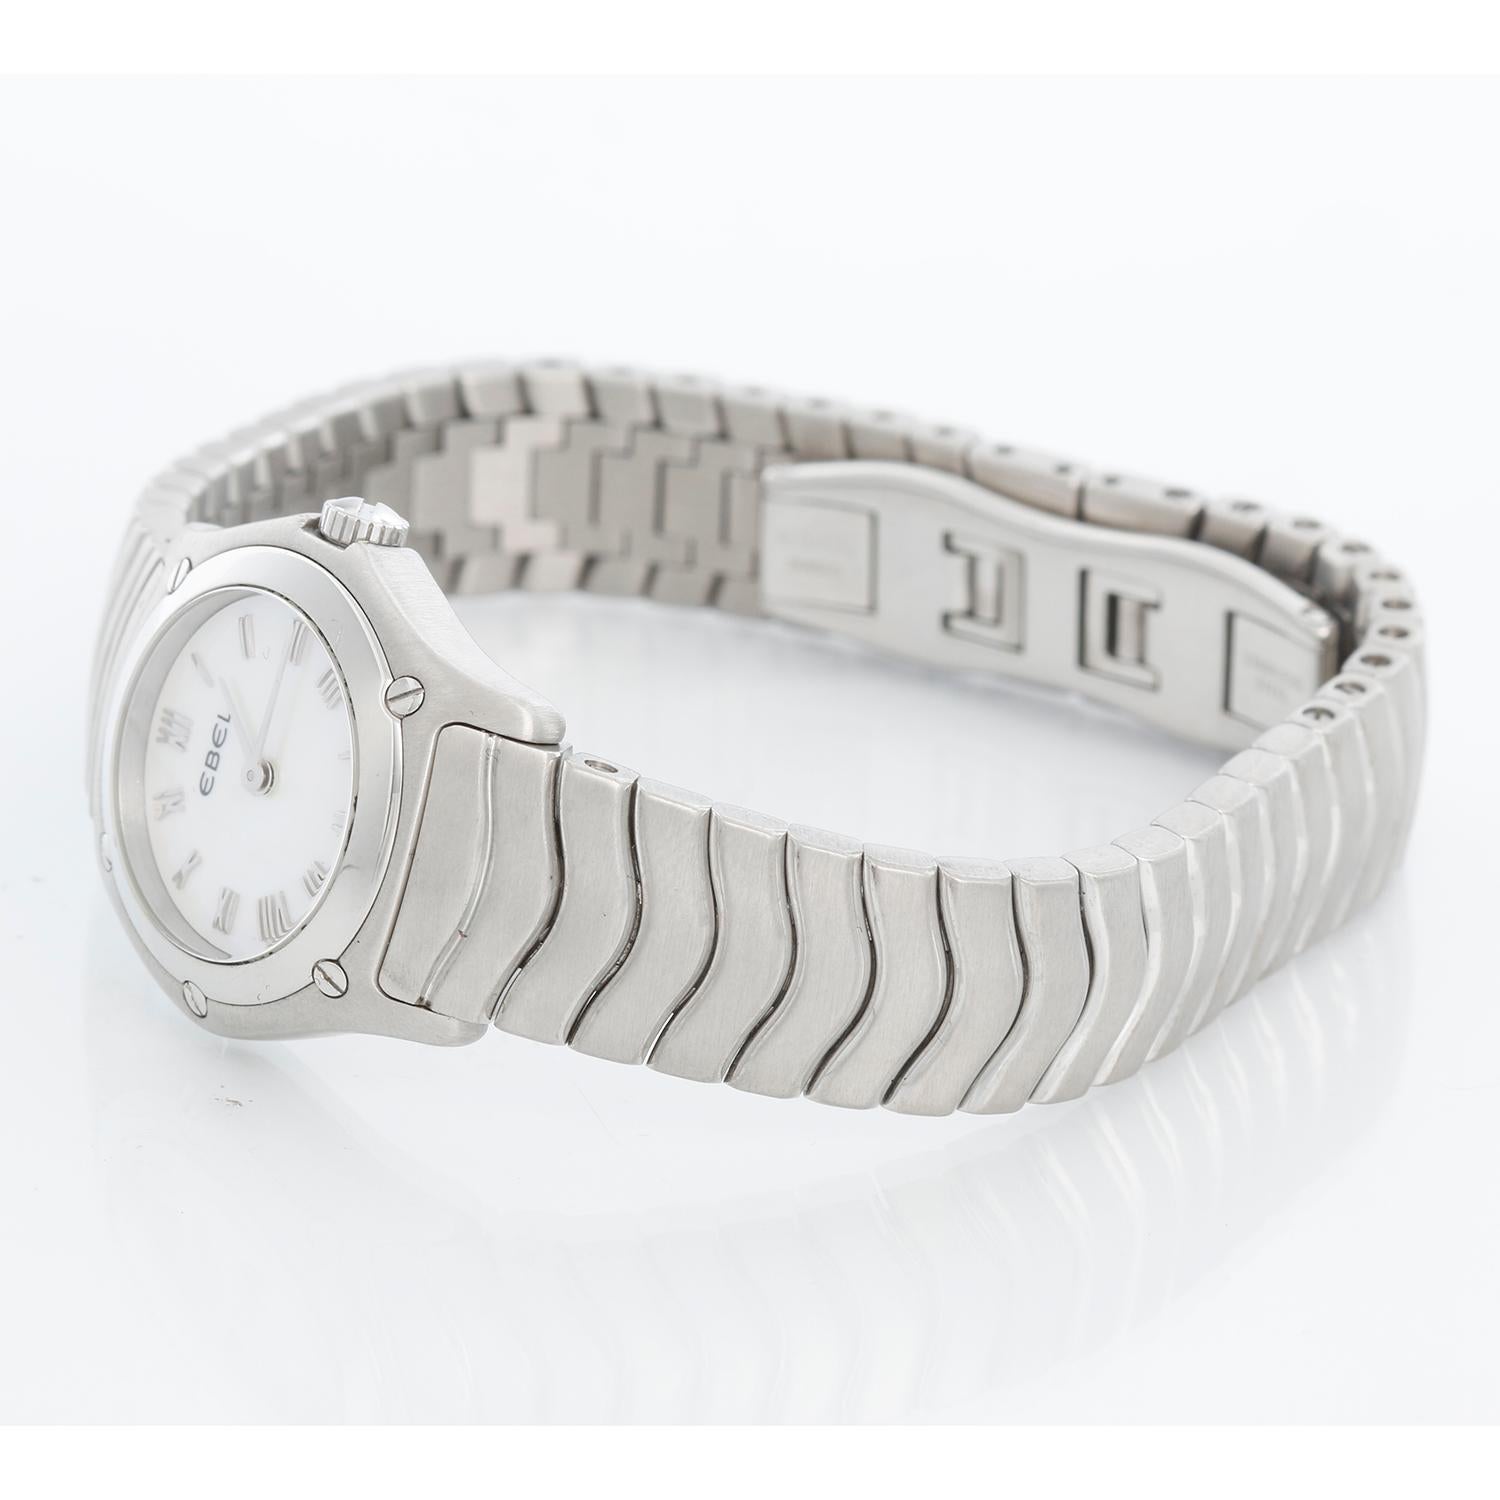 Ebel Classic Wave Mother of Pearl Ladies Watch - Quartz movement. Stainless steel case (23mm diameter). Mother of Pearl Dial. Stainless Steel bracelet will fit up to a 7 inch wrist. Pre-owned with Ebel box